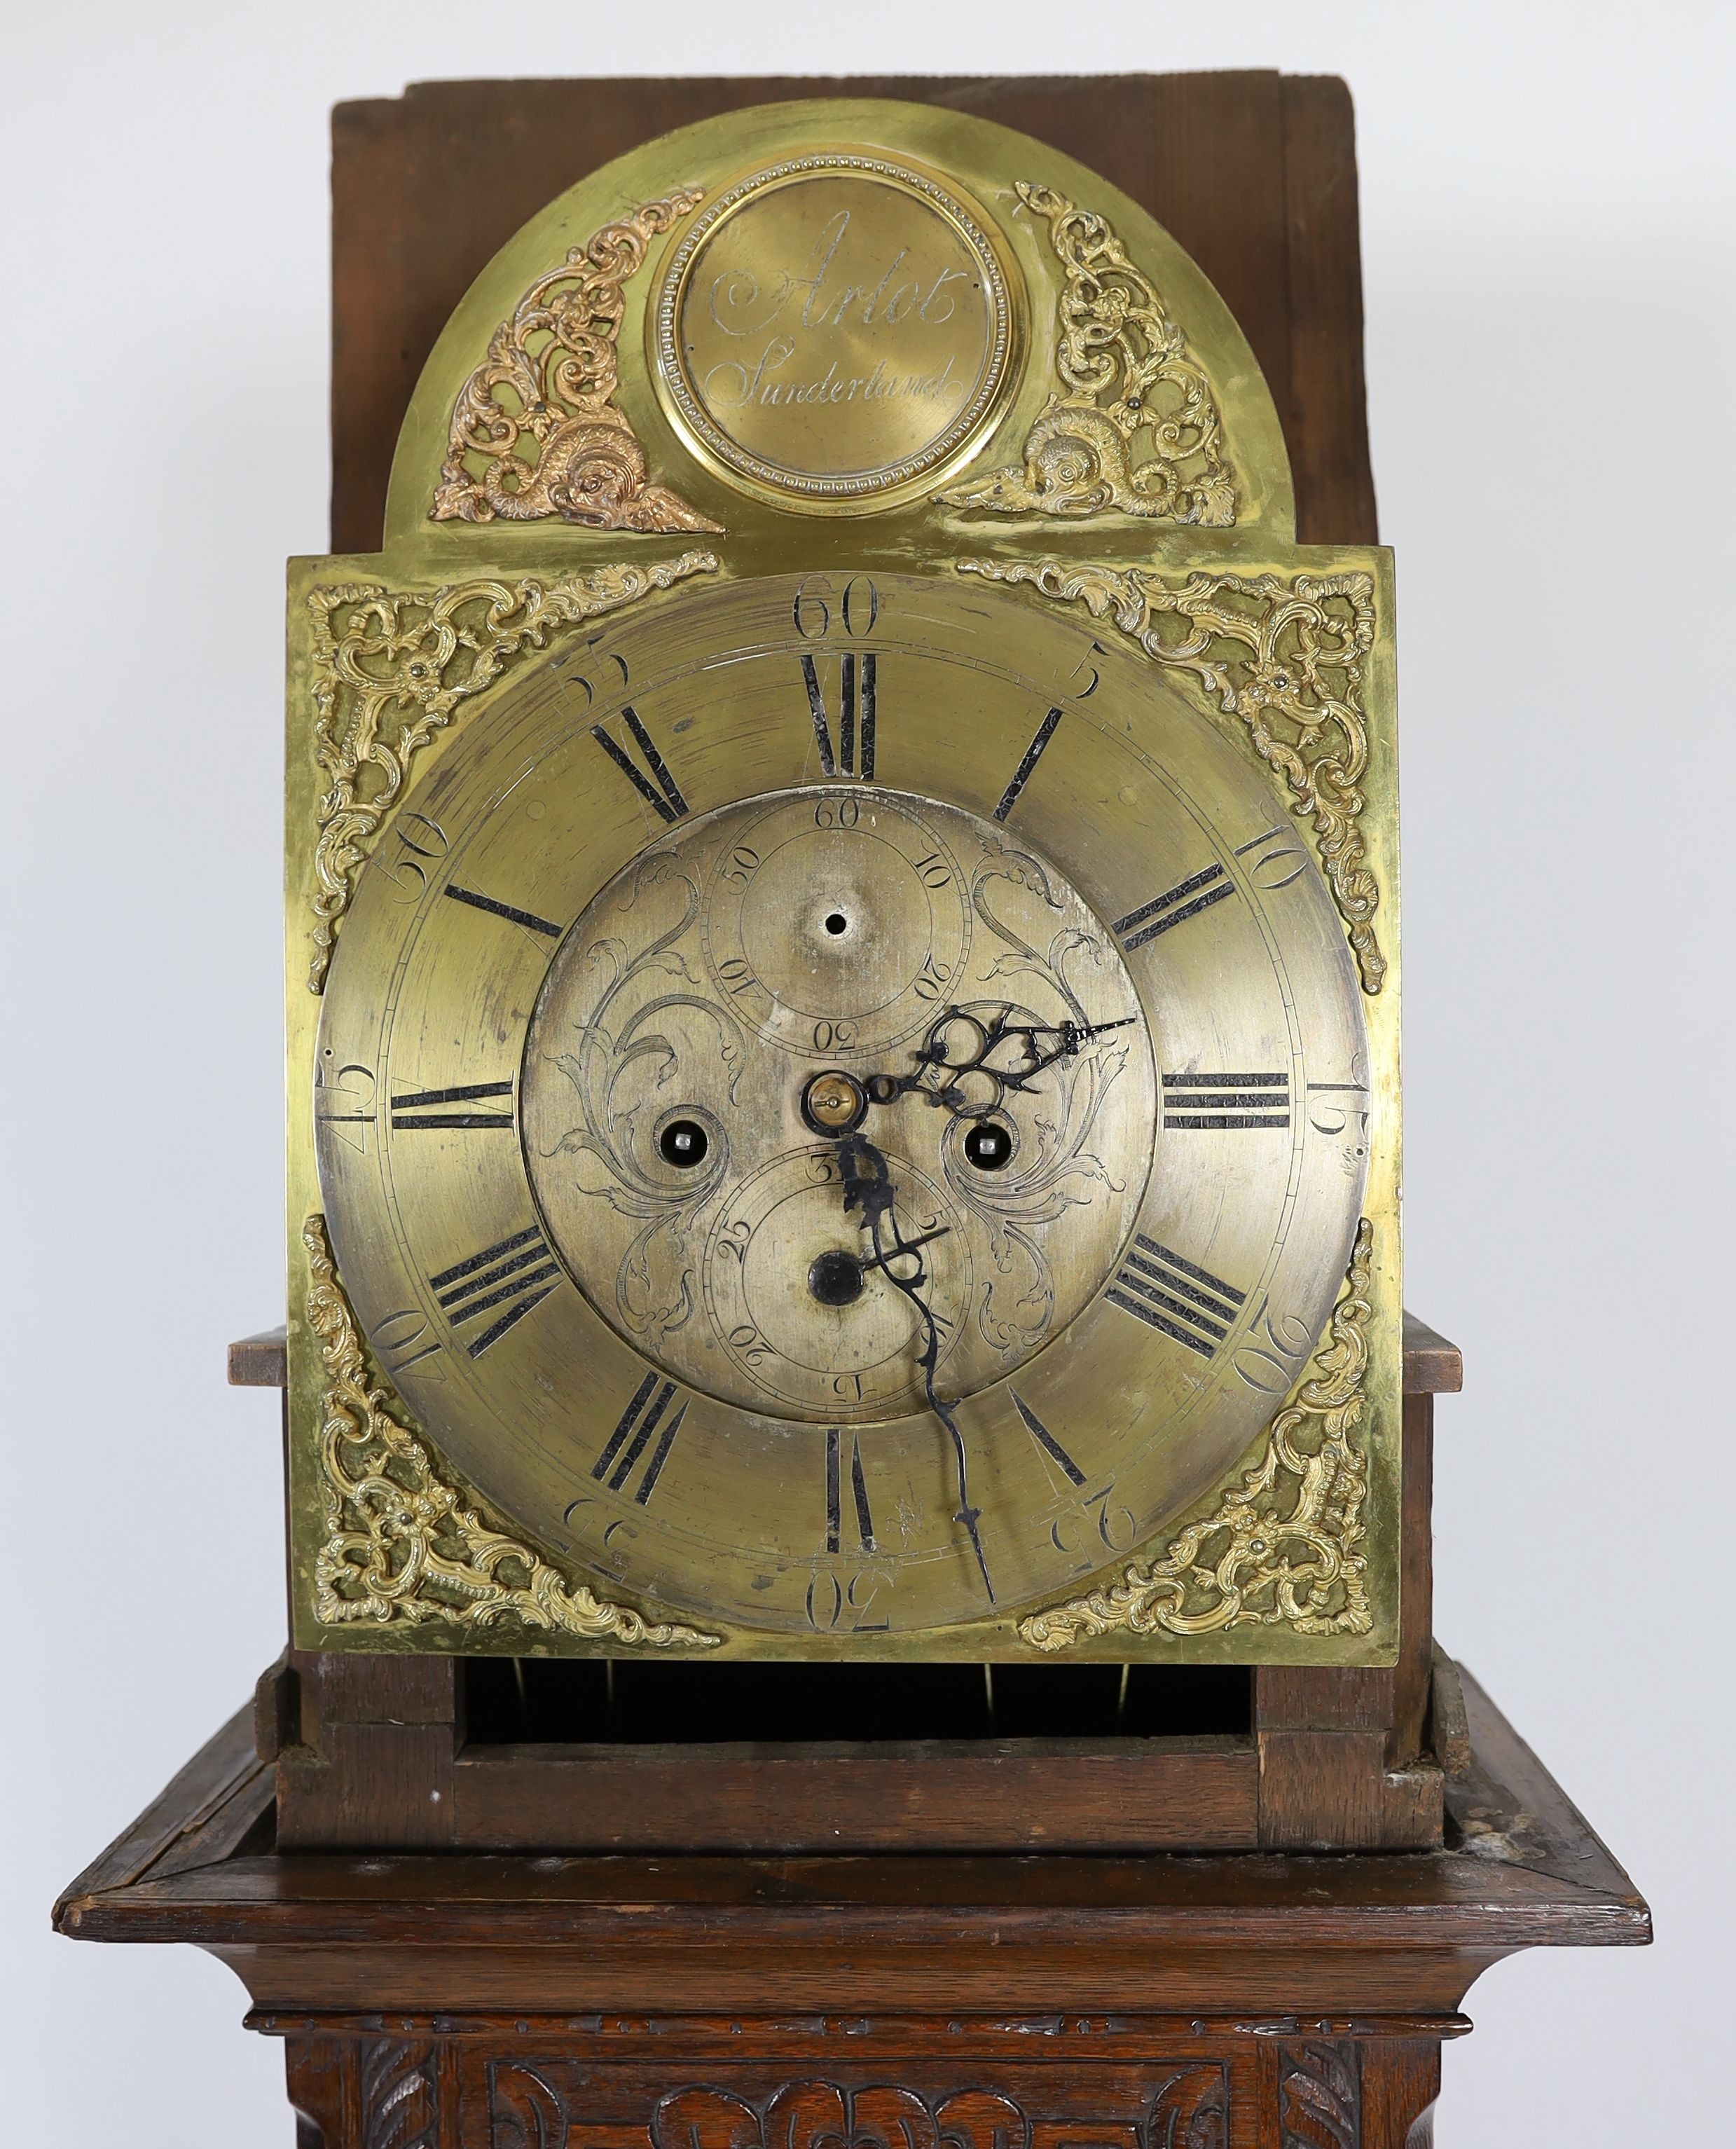 A George III oak eight day longcase clock, the 30cm arched dial marked Arlot, Sunderland, with subsidiary seconds and calendar dials, case 250cm high (later carved)